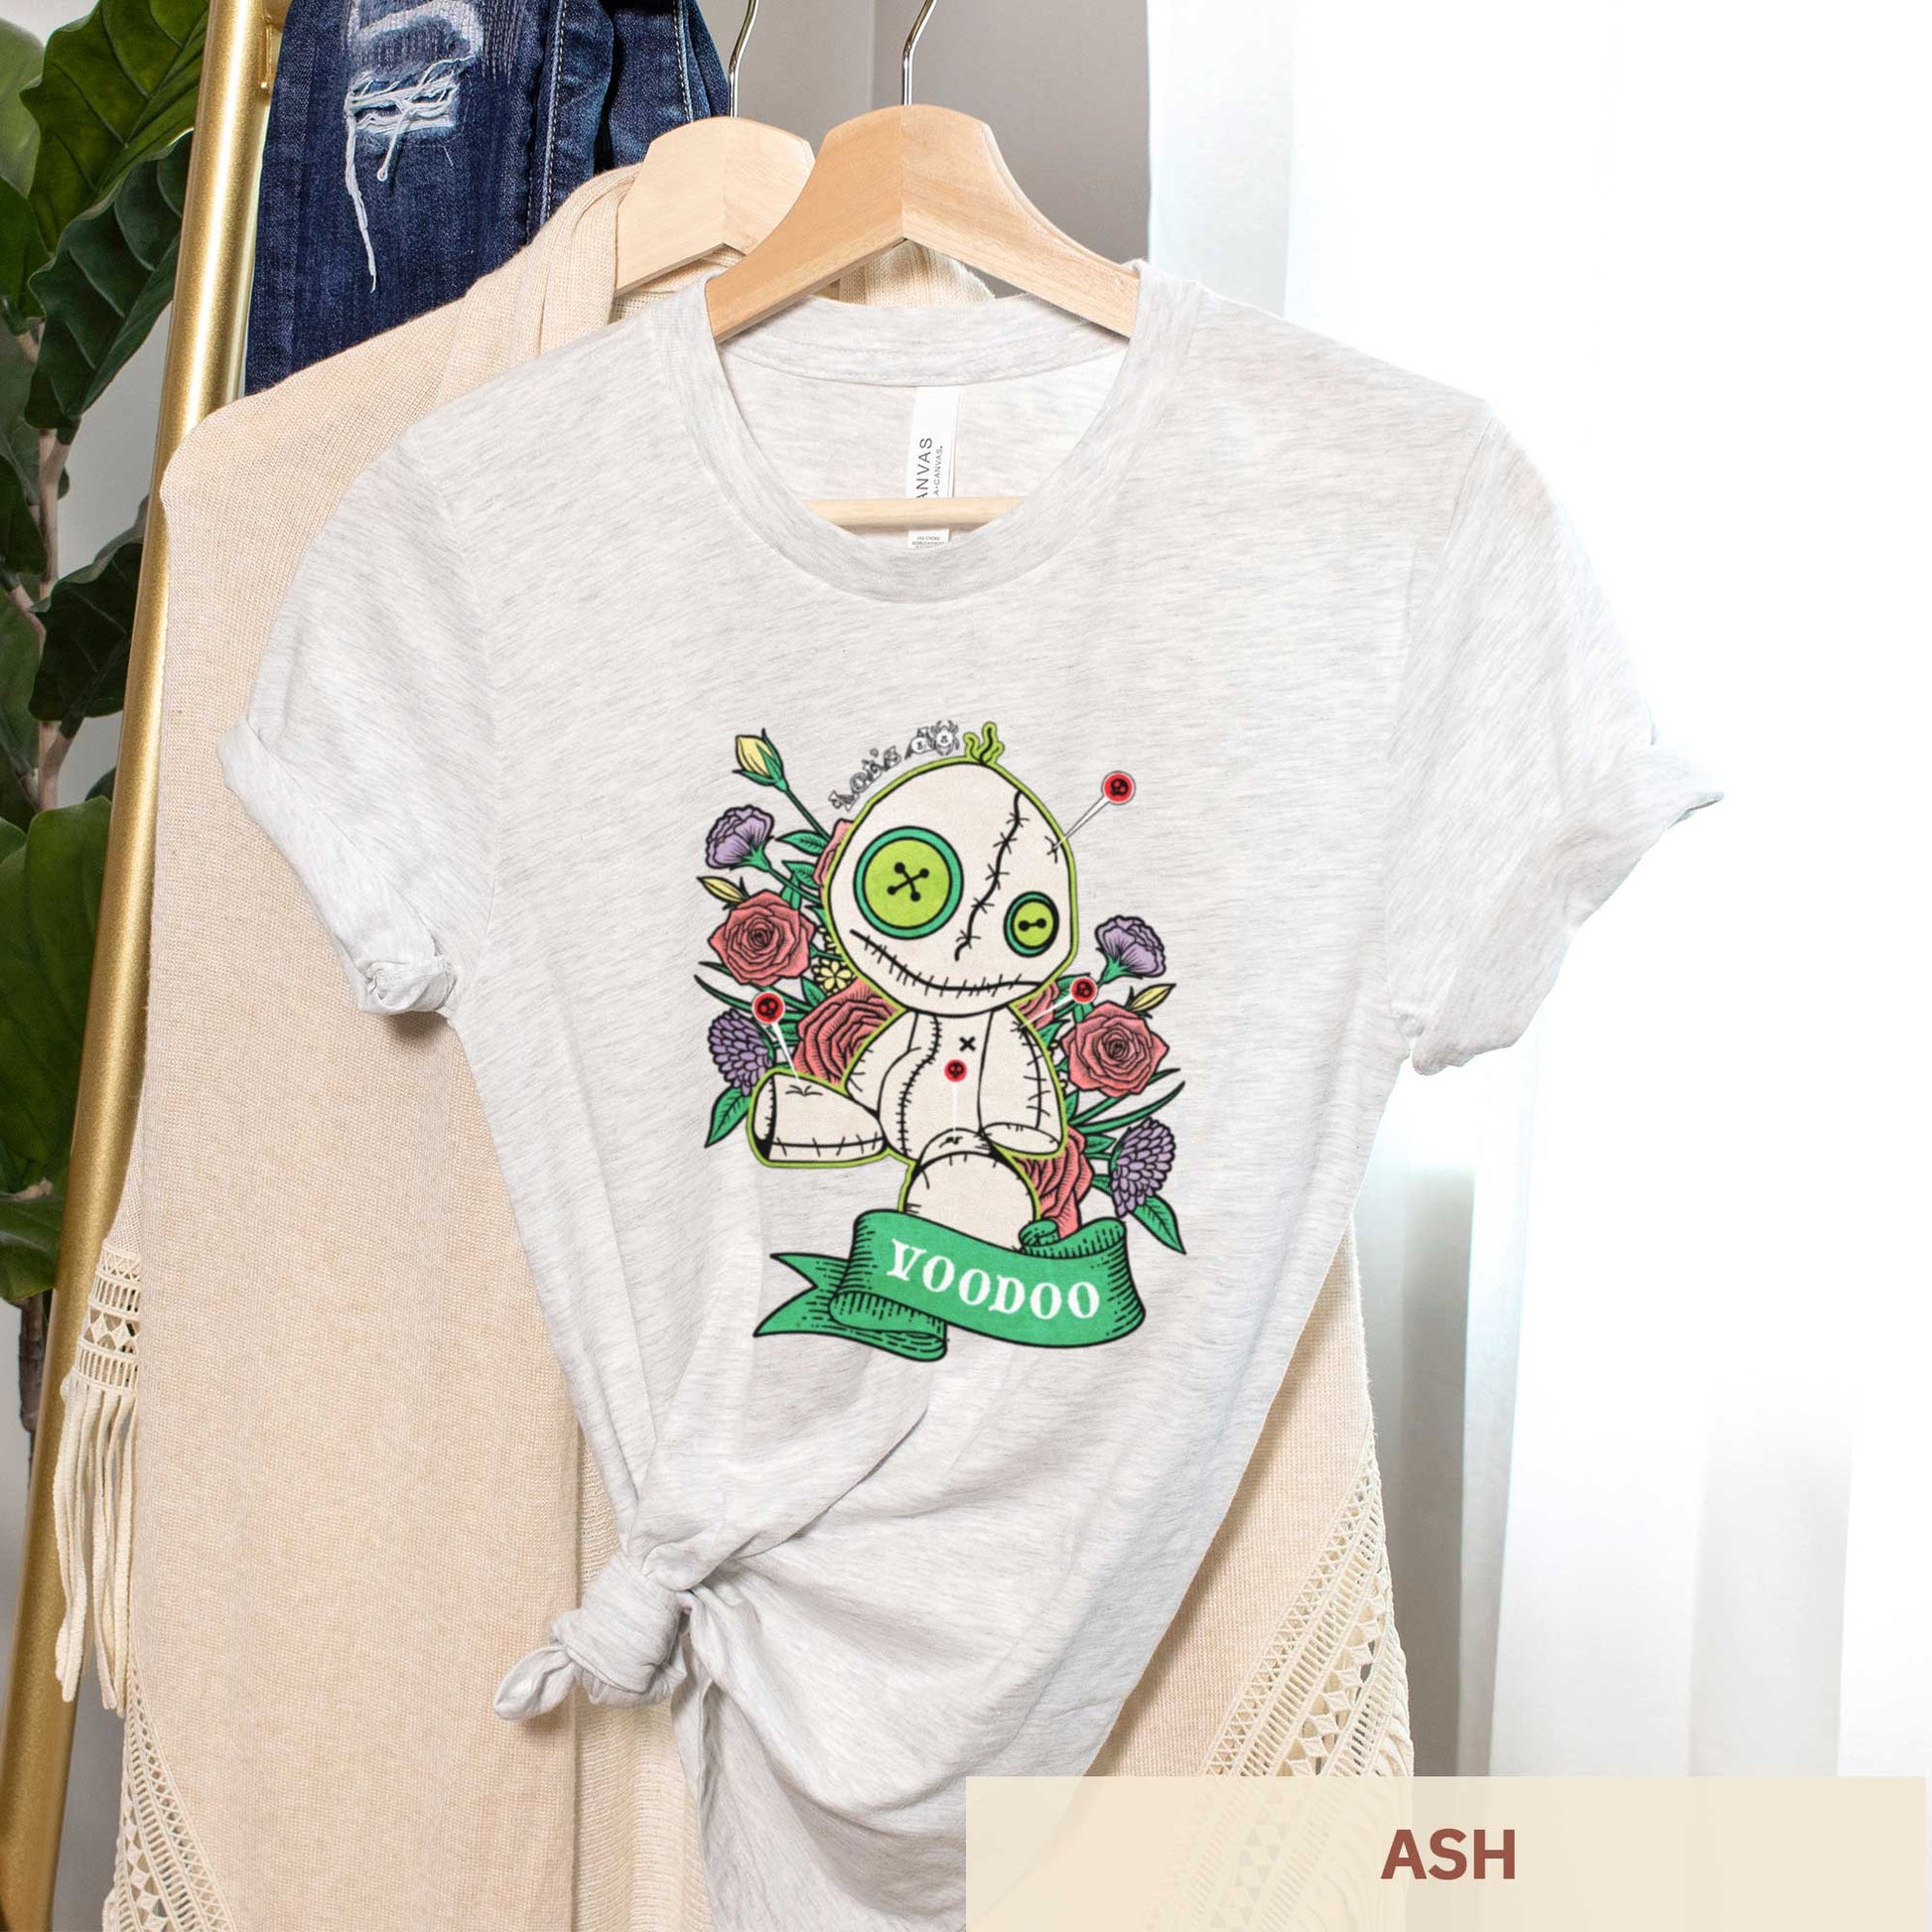 An hanging ash Bella Canvas t-shirt featuring a cartoon voodoo doll and flowers.